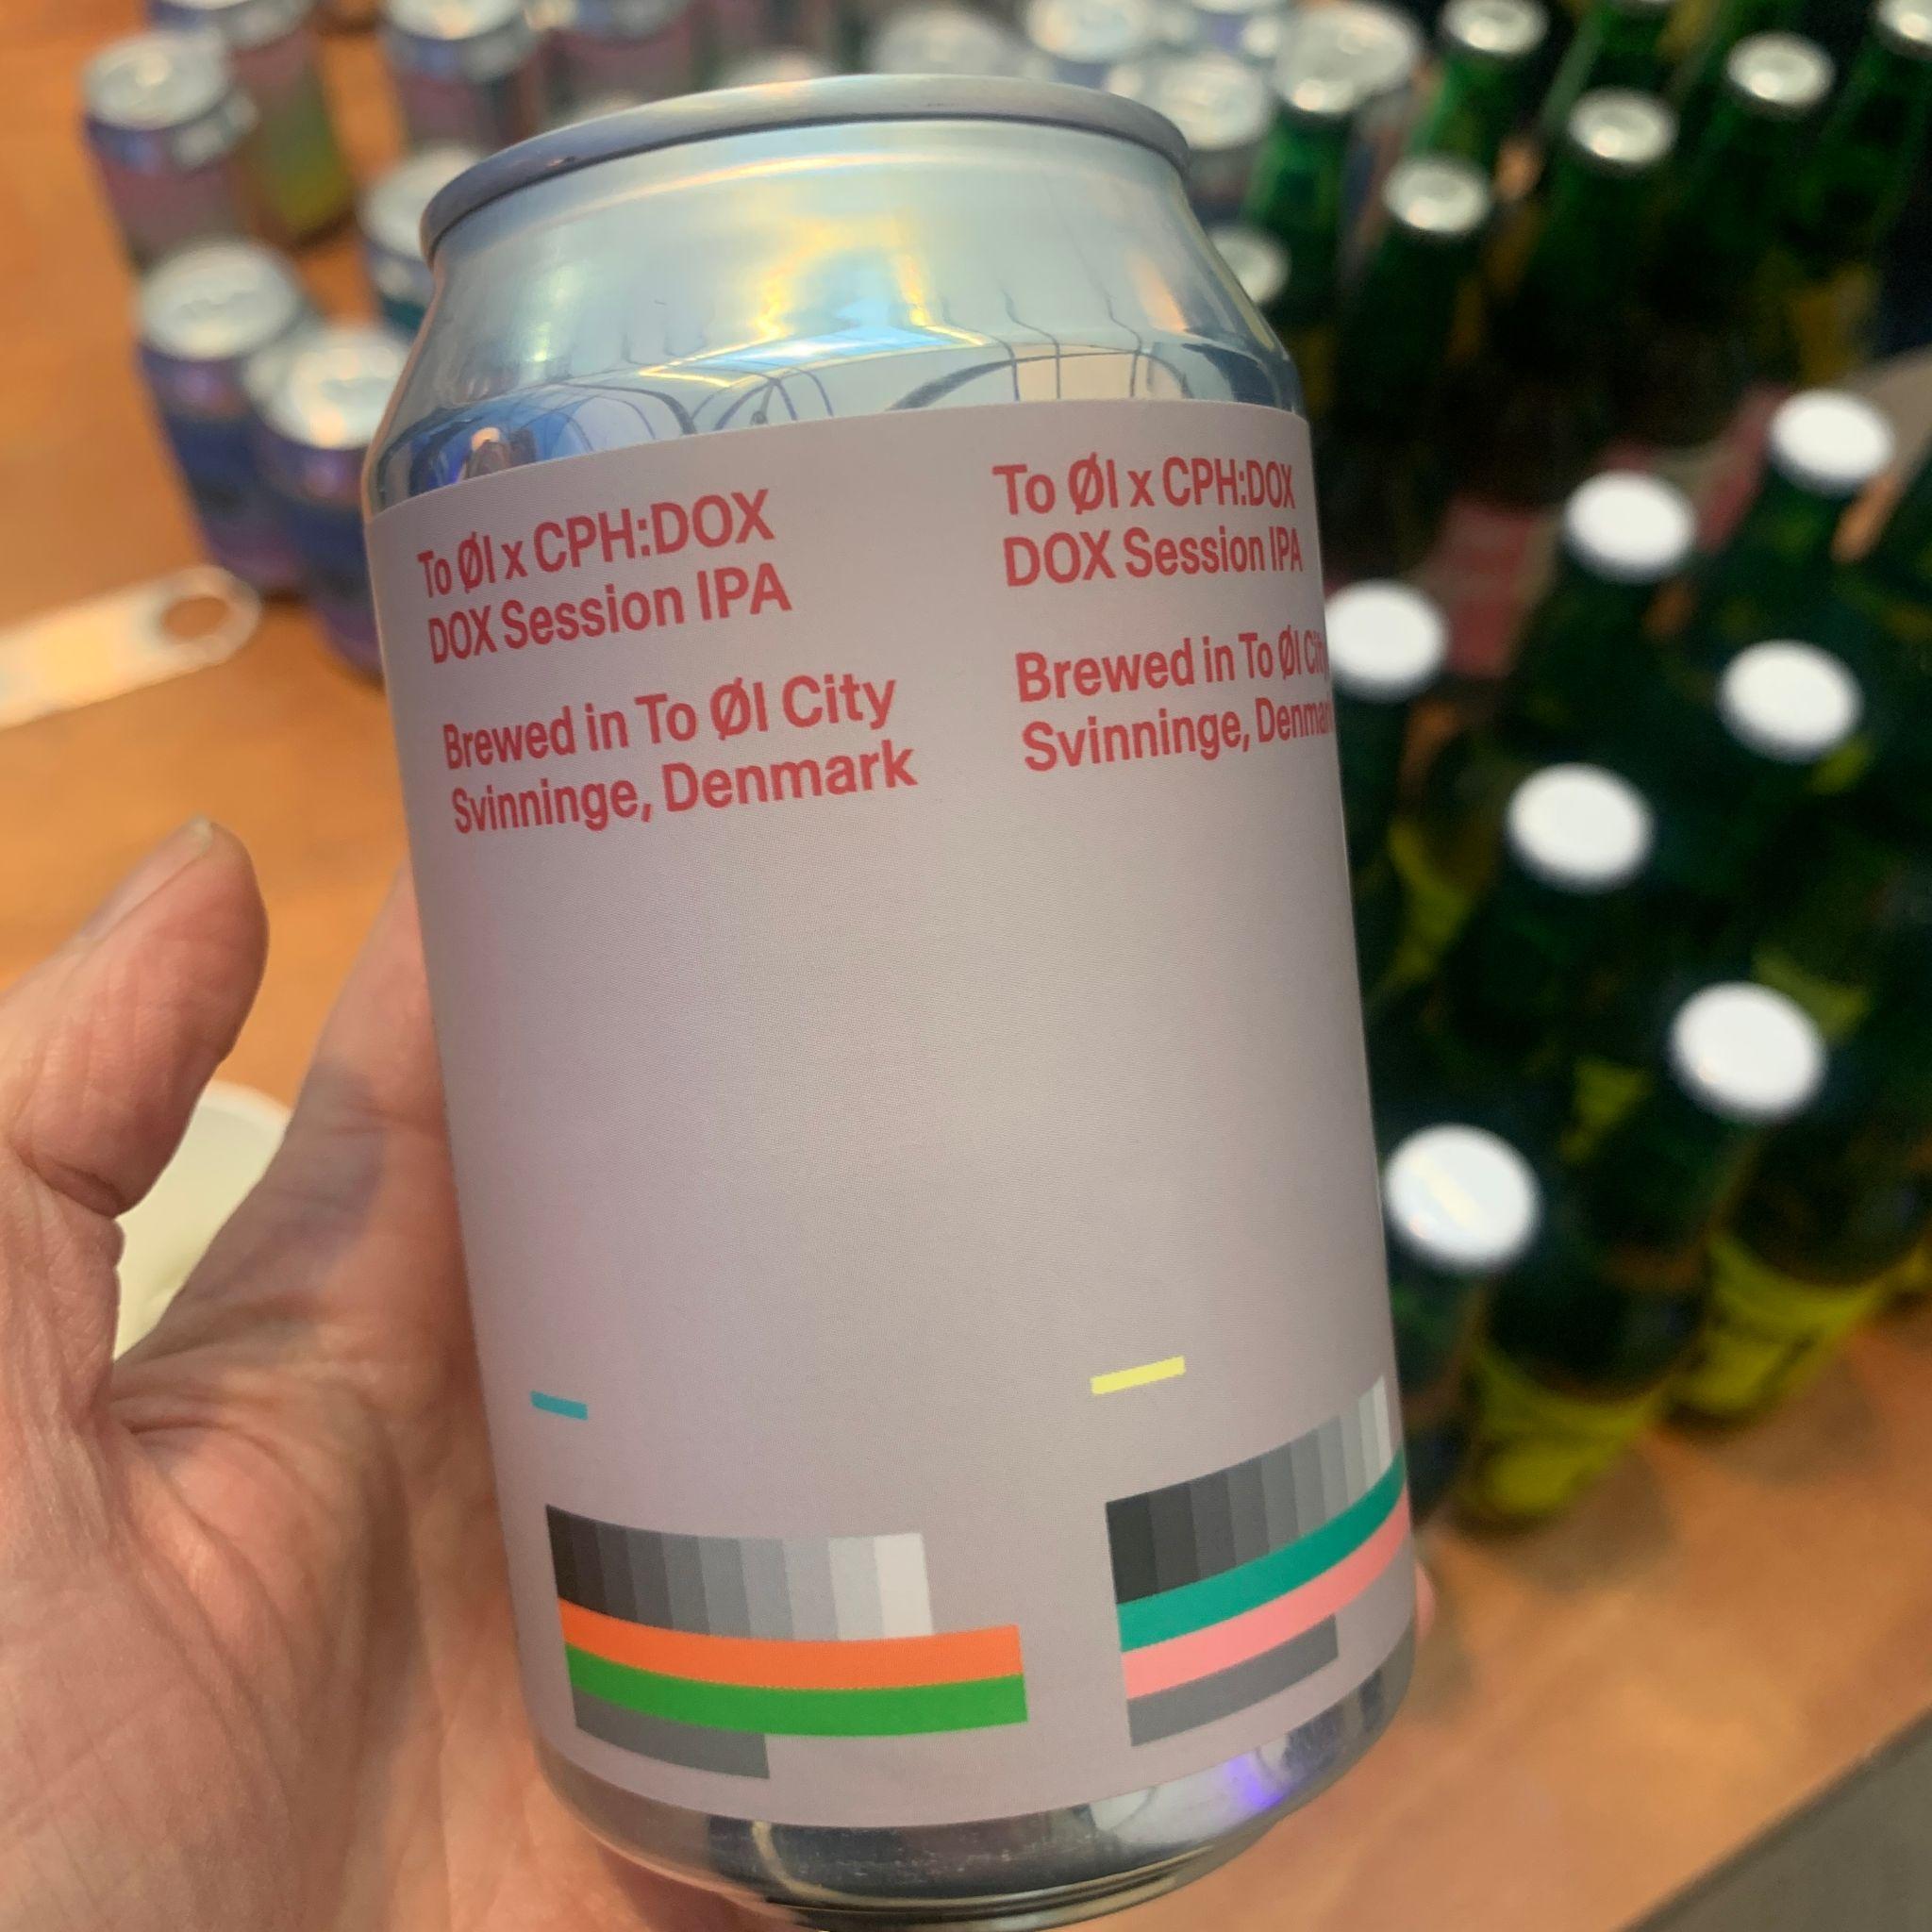 Aluminum can from the CPH:DOX event